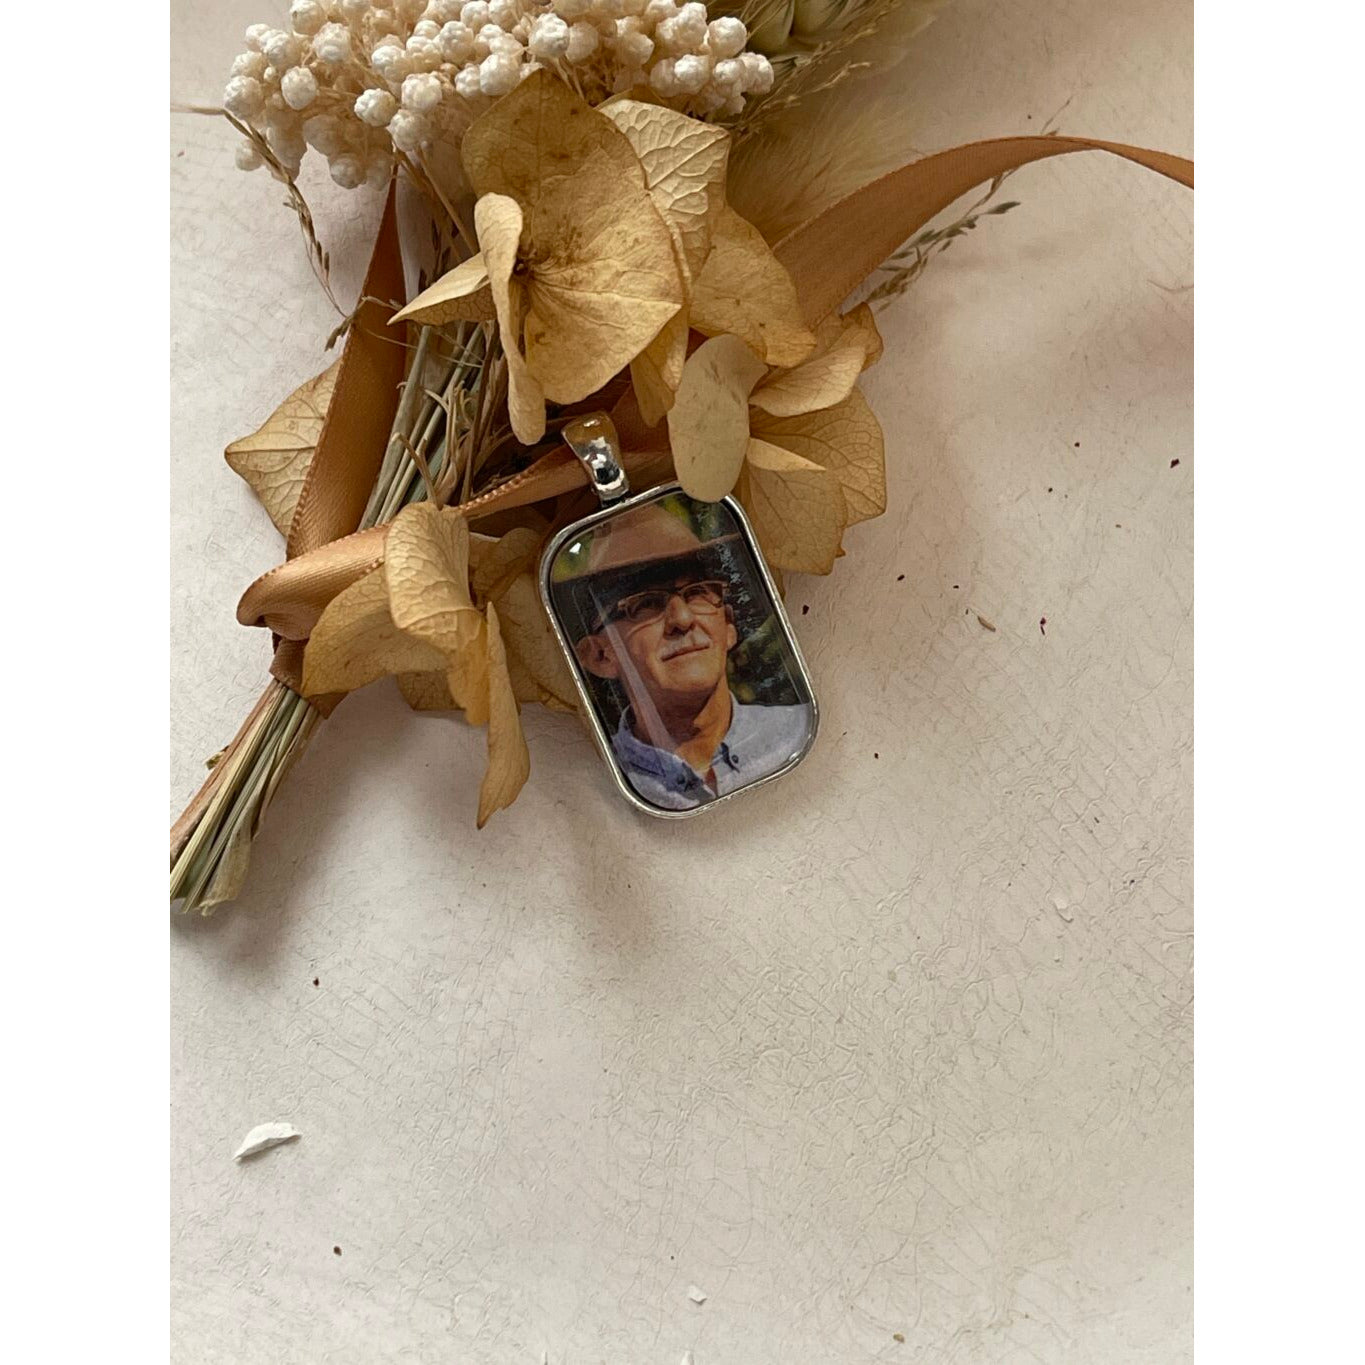 A memorial pendant or memorial charm in the design called Rectangle Memorial Photo Pendant, showing a photo of a grandfather inside. The pendant is nestled on neutral textured surface and dried gold flowers and is intended to be tied to a wedding bouquet with ribbon or hung from a chain to wear, to include a deceased relative on your wedding day.